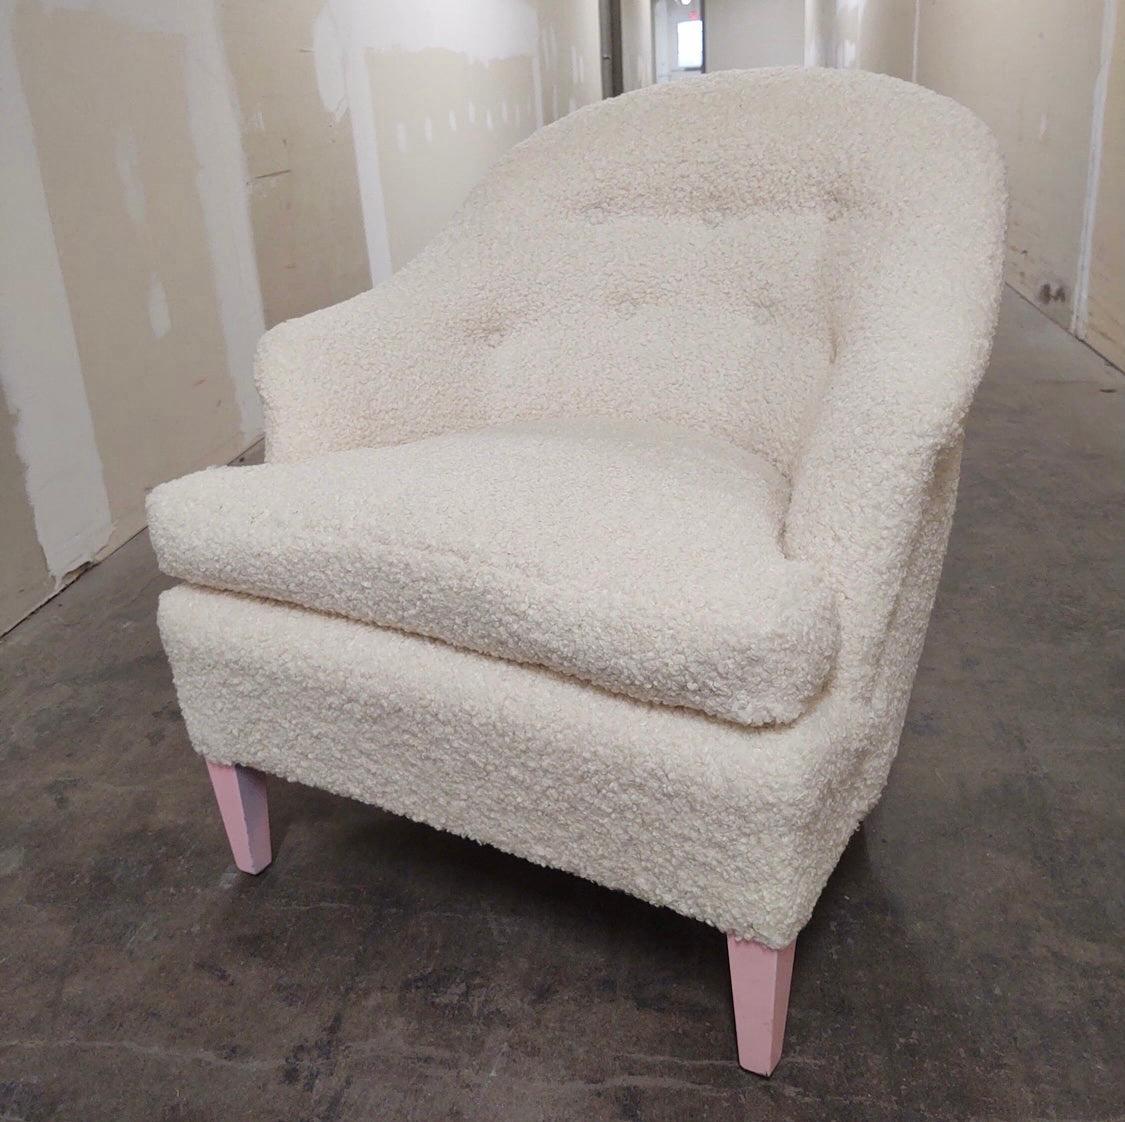 Featuring new boucle faux shearling and pink, yes pink, legs, is this Henredon spoon back chair. Iconic midcentury lines throughout and the fabric is to die for. Now, more than ever, home is where the heart is.